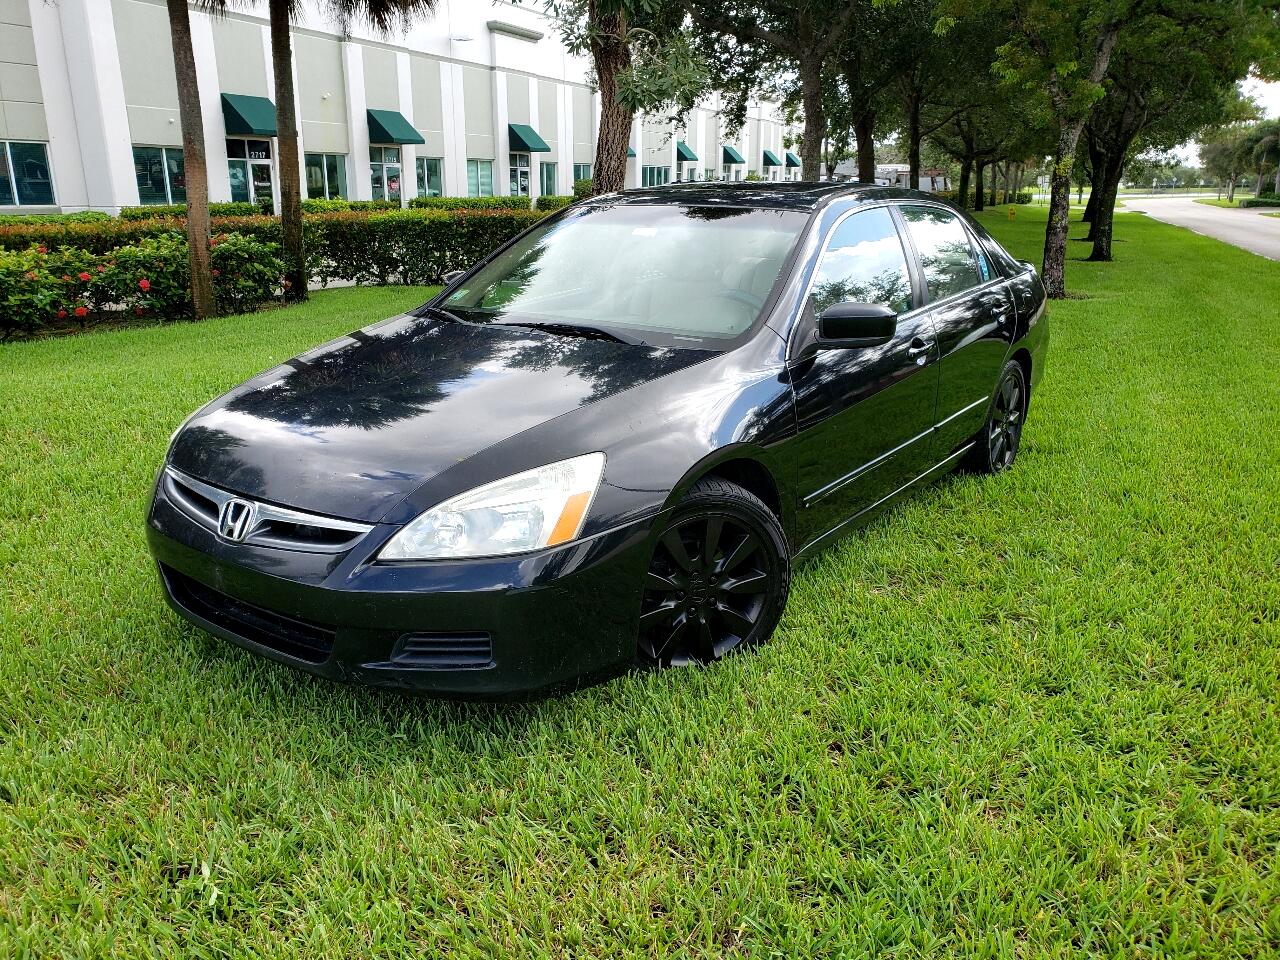 Buy Here Pay Here 2006 Honda Accord for Sale in Pompano Beach FL 33069 Car  Express Florida, LLC